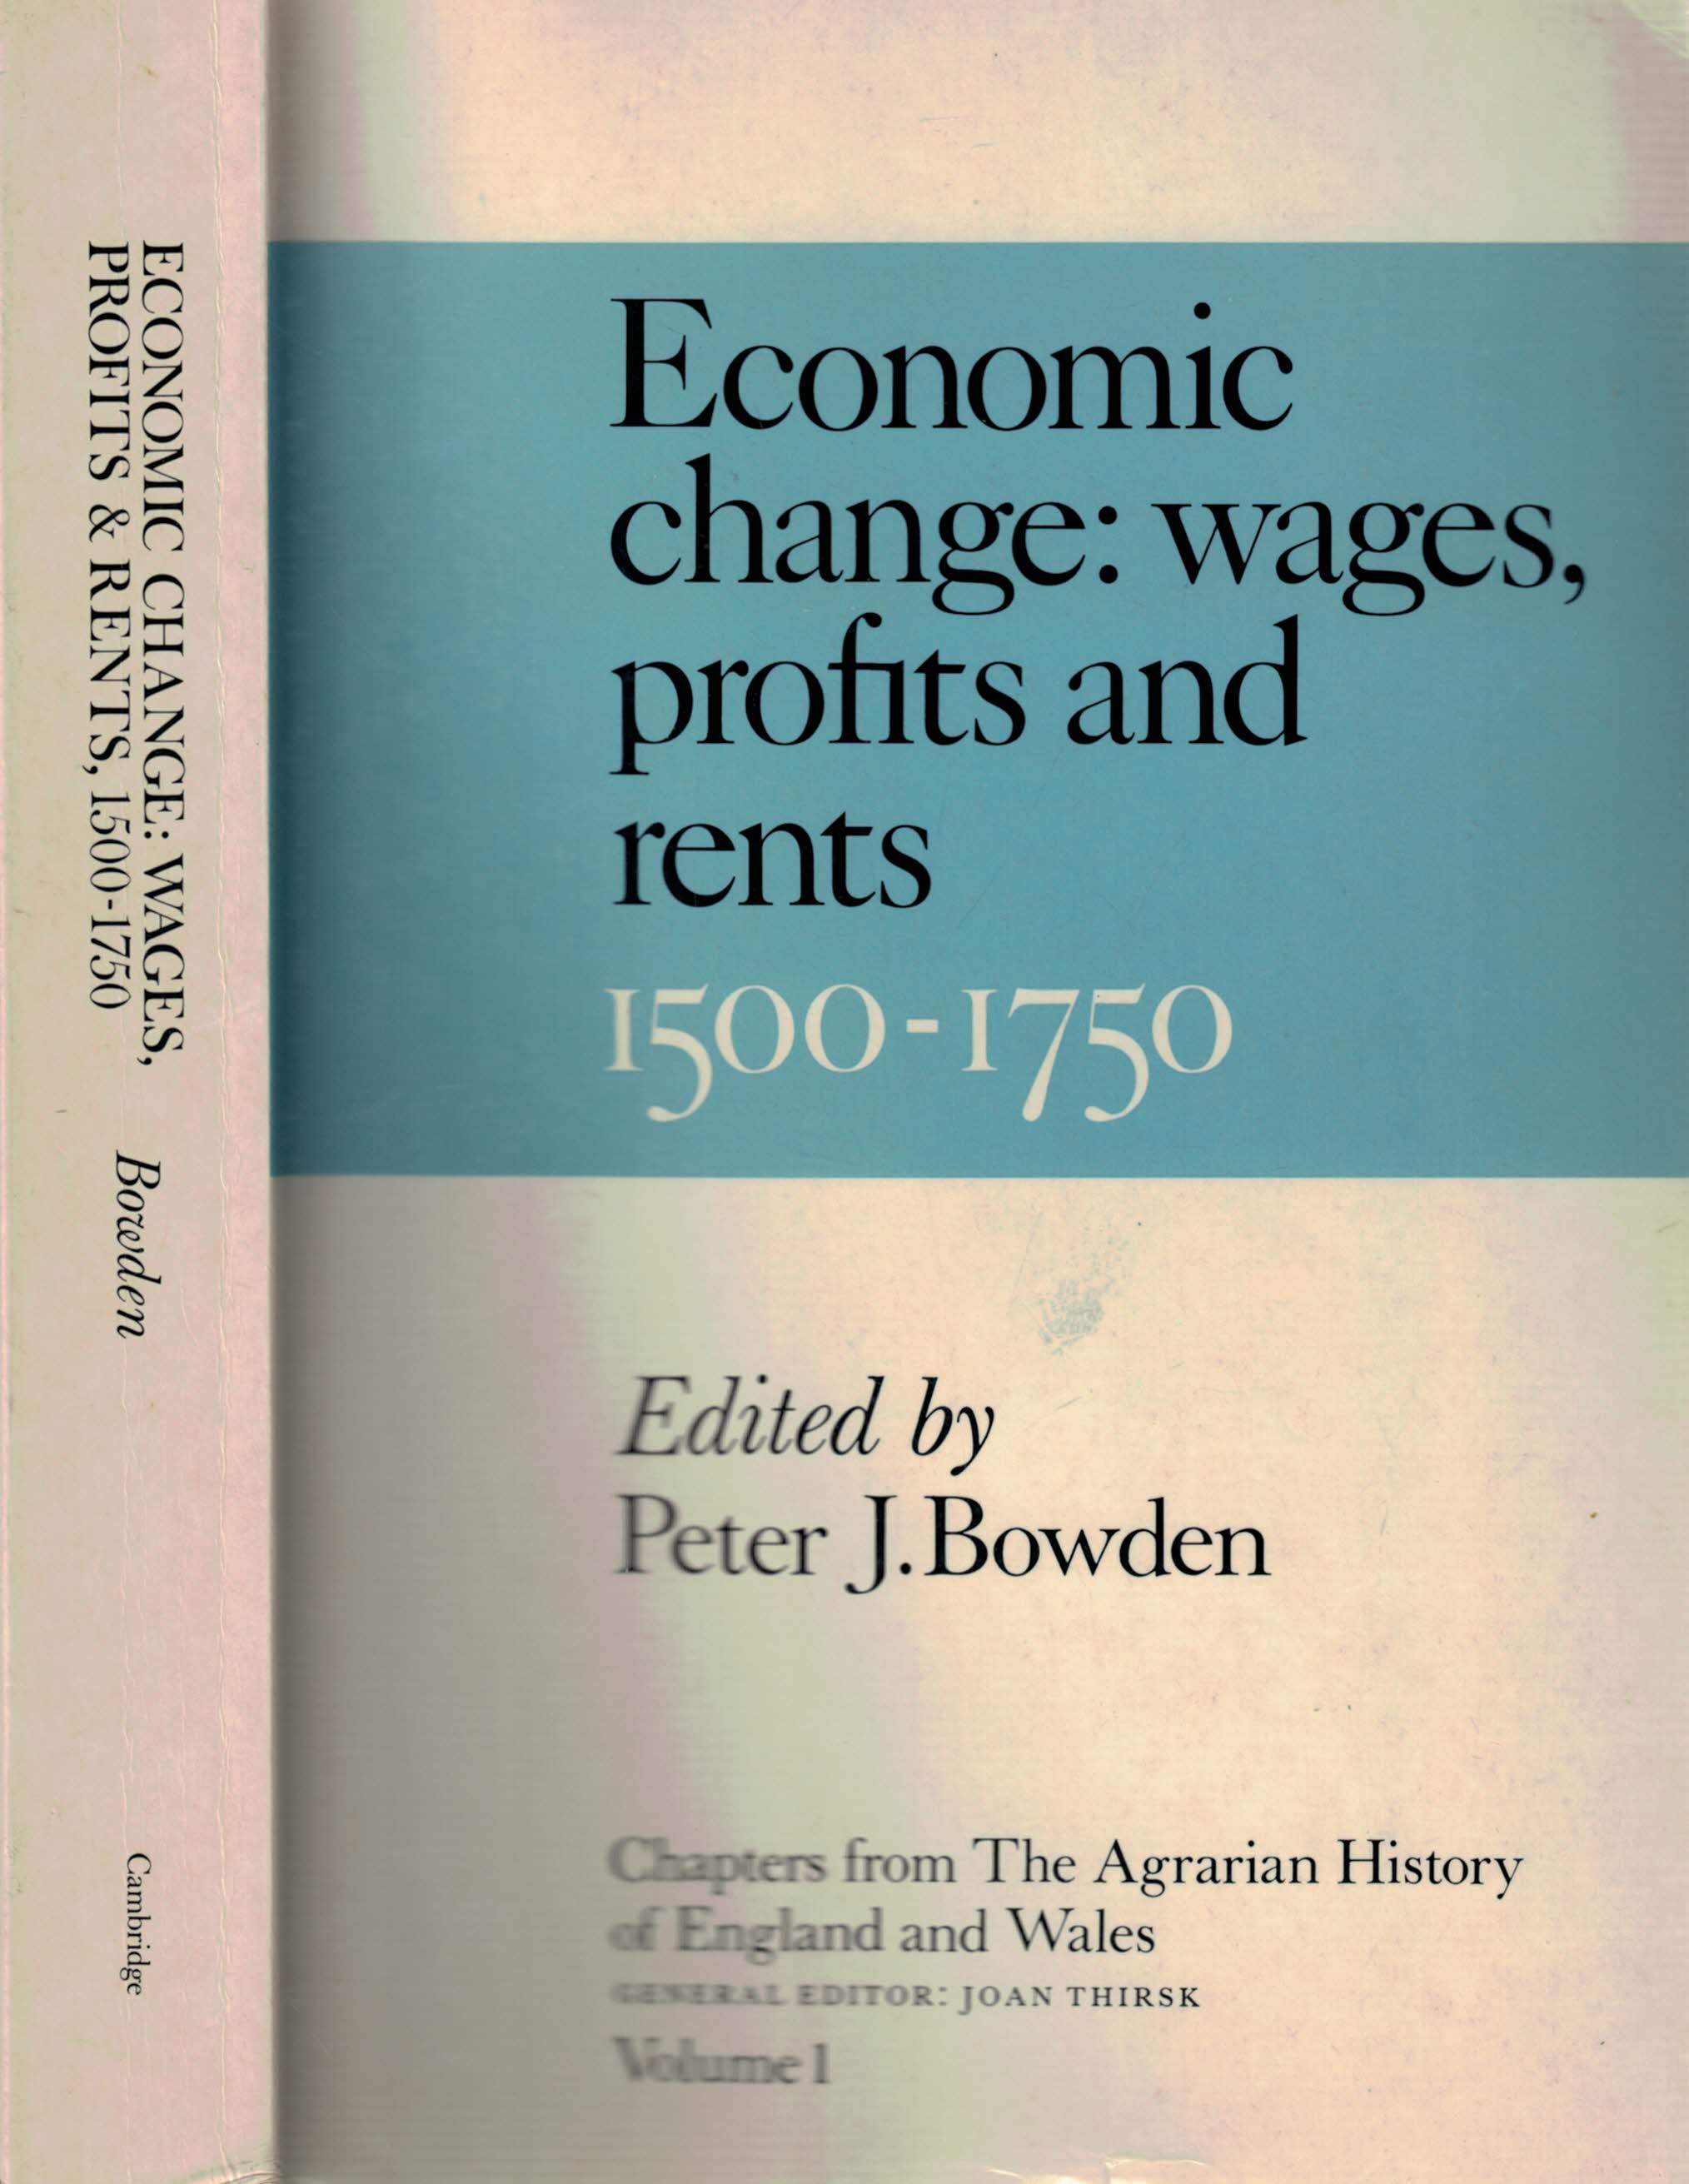 Chapters from the Agrarian History of England and Wales. Volume 1: Economic Change: Prices, Wages, Profits and Rents, 1500-1750.